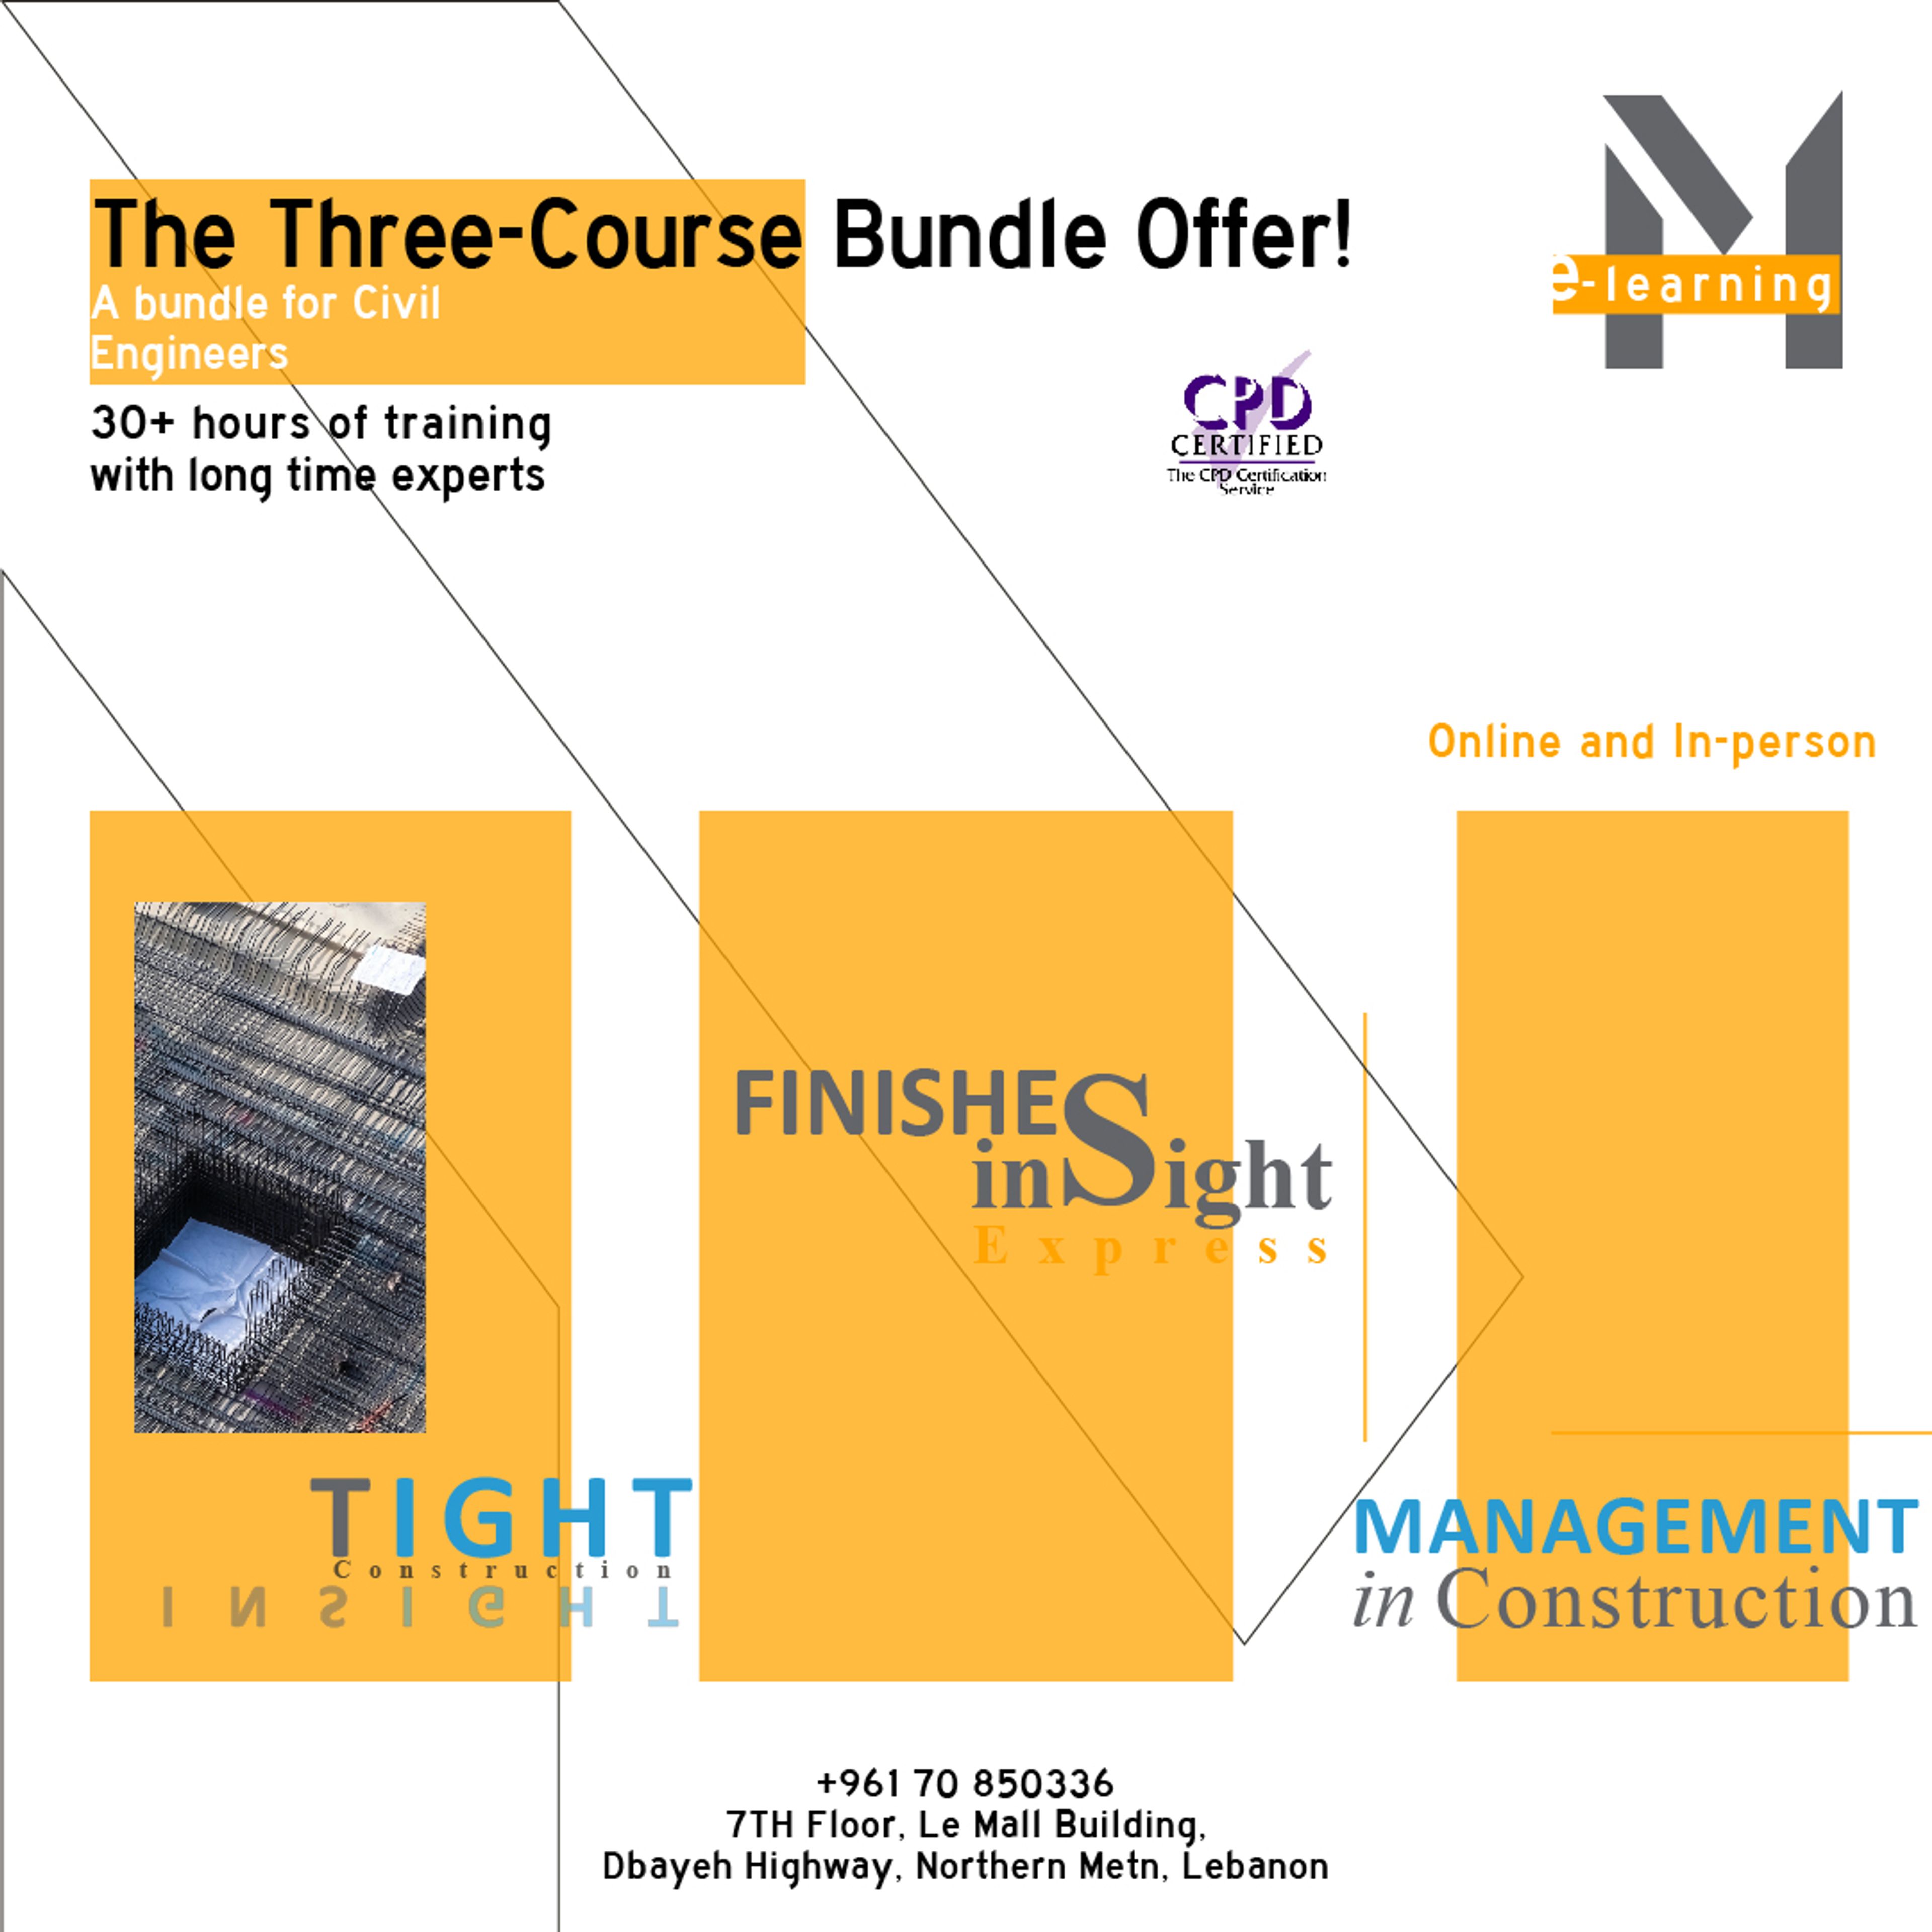 THE THREE-COURSE BUNDLE OFFER FOR CIVIL ENGINEERS